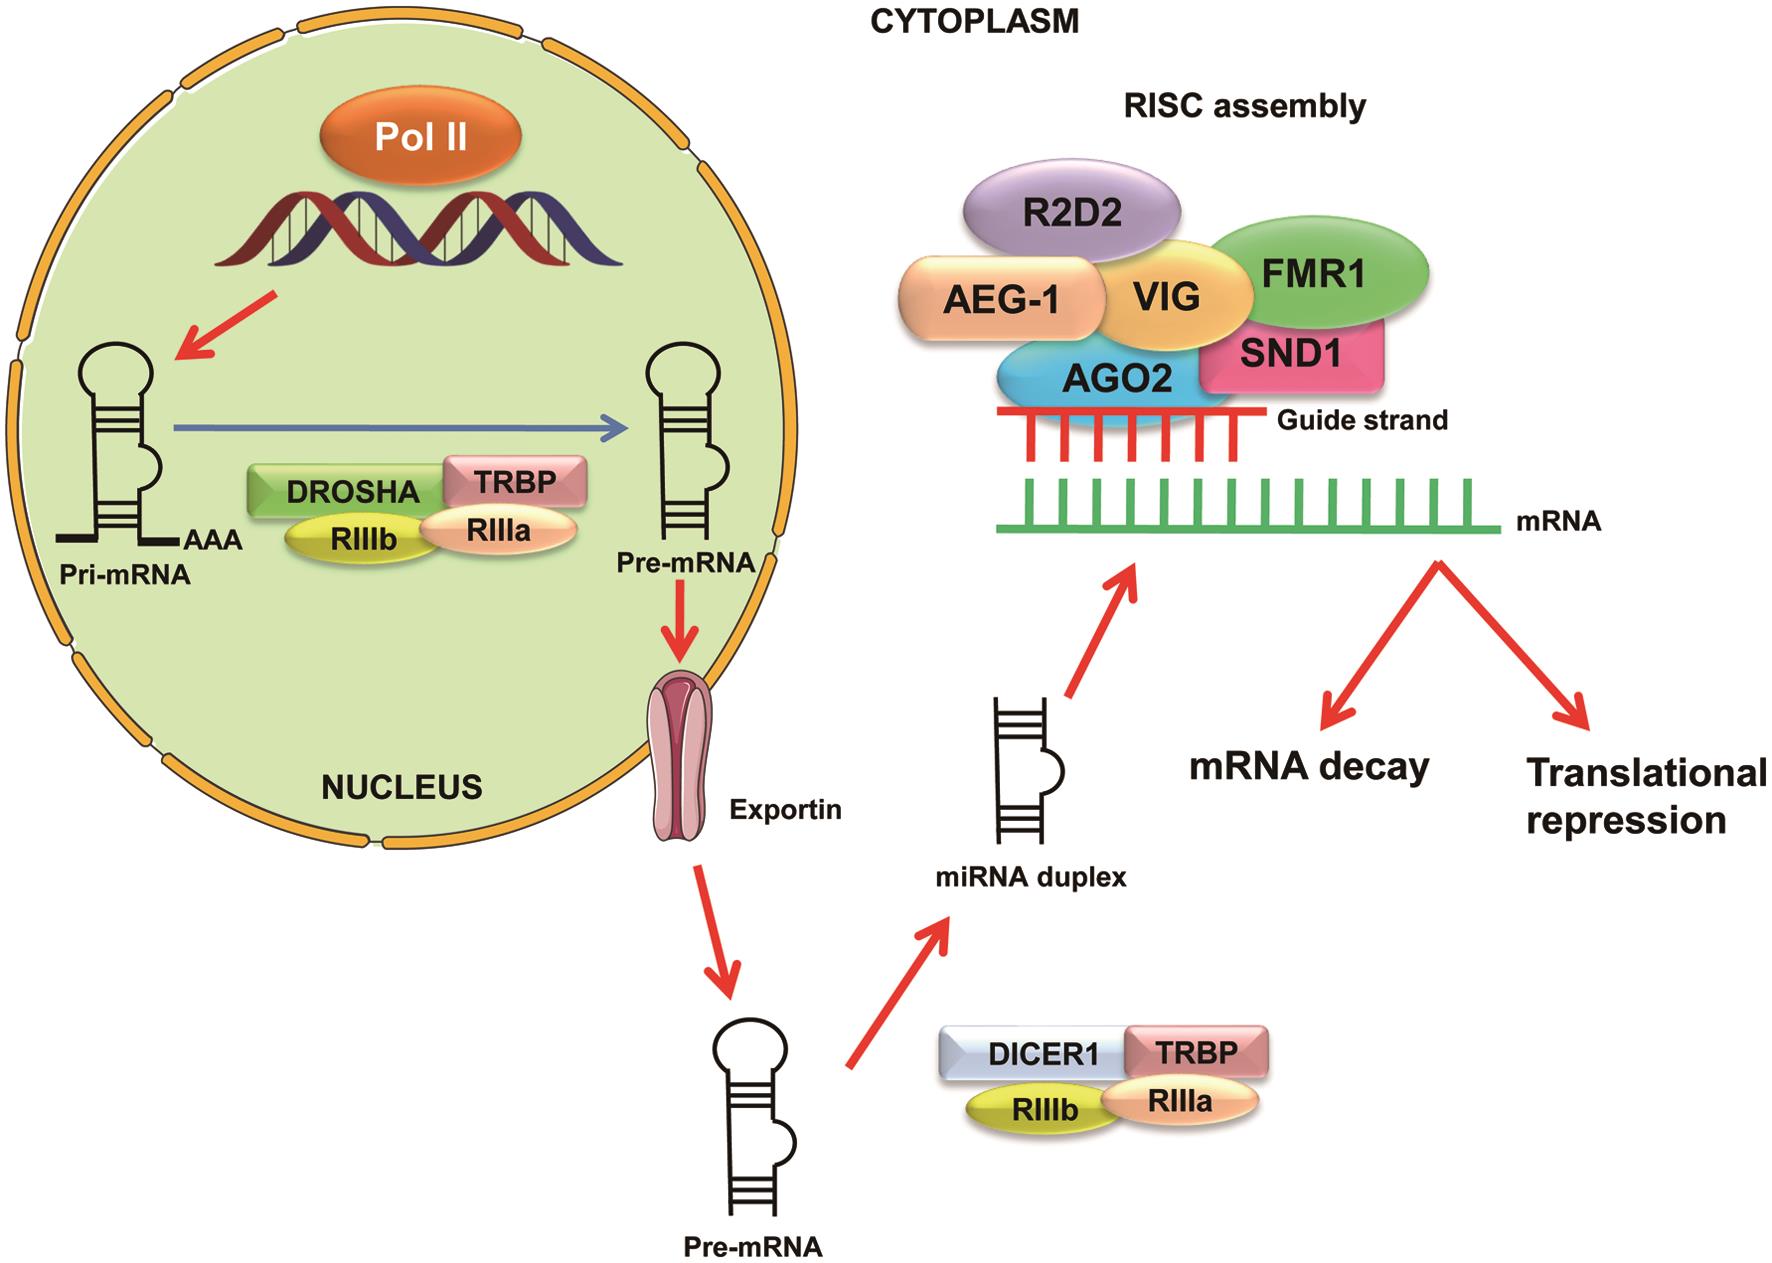 Schematic representation of miRNA biogenesis and RISC assembly.